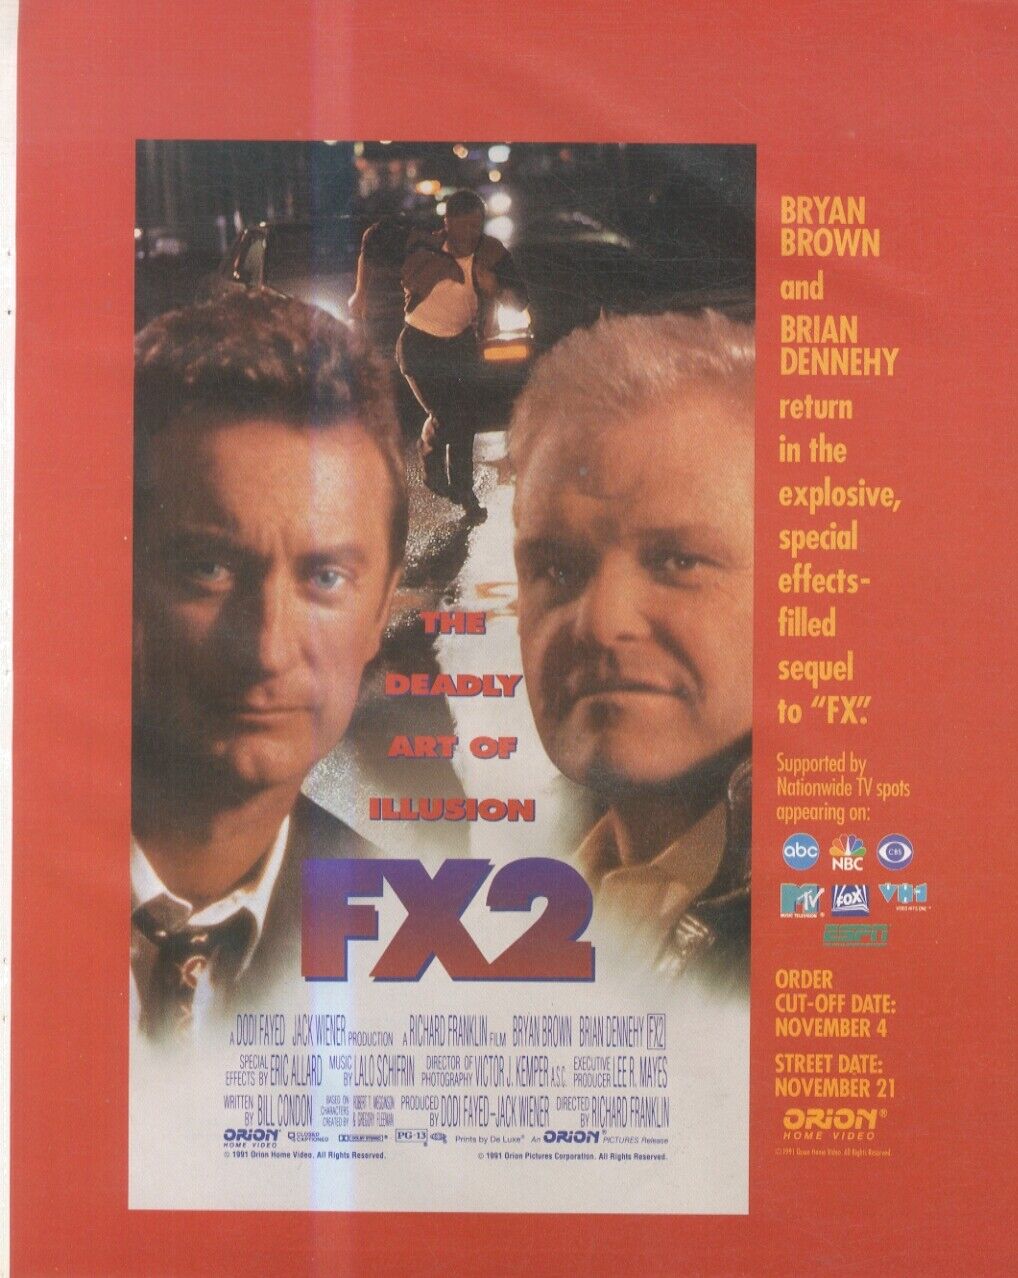 SFBK61 PICTURE/ADVERT 13X11 FX2 - THE DEADLY ART OF ILLUSION - BRYAN BROWN